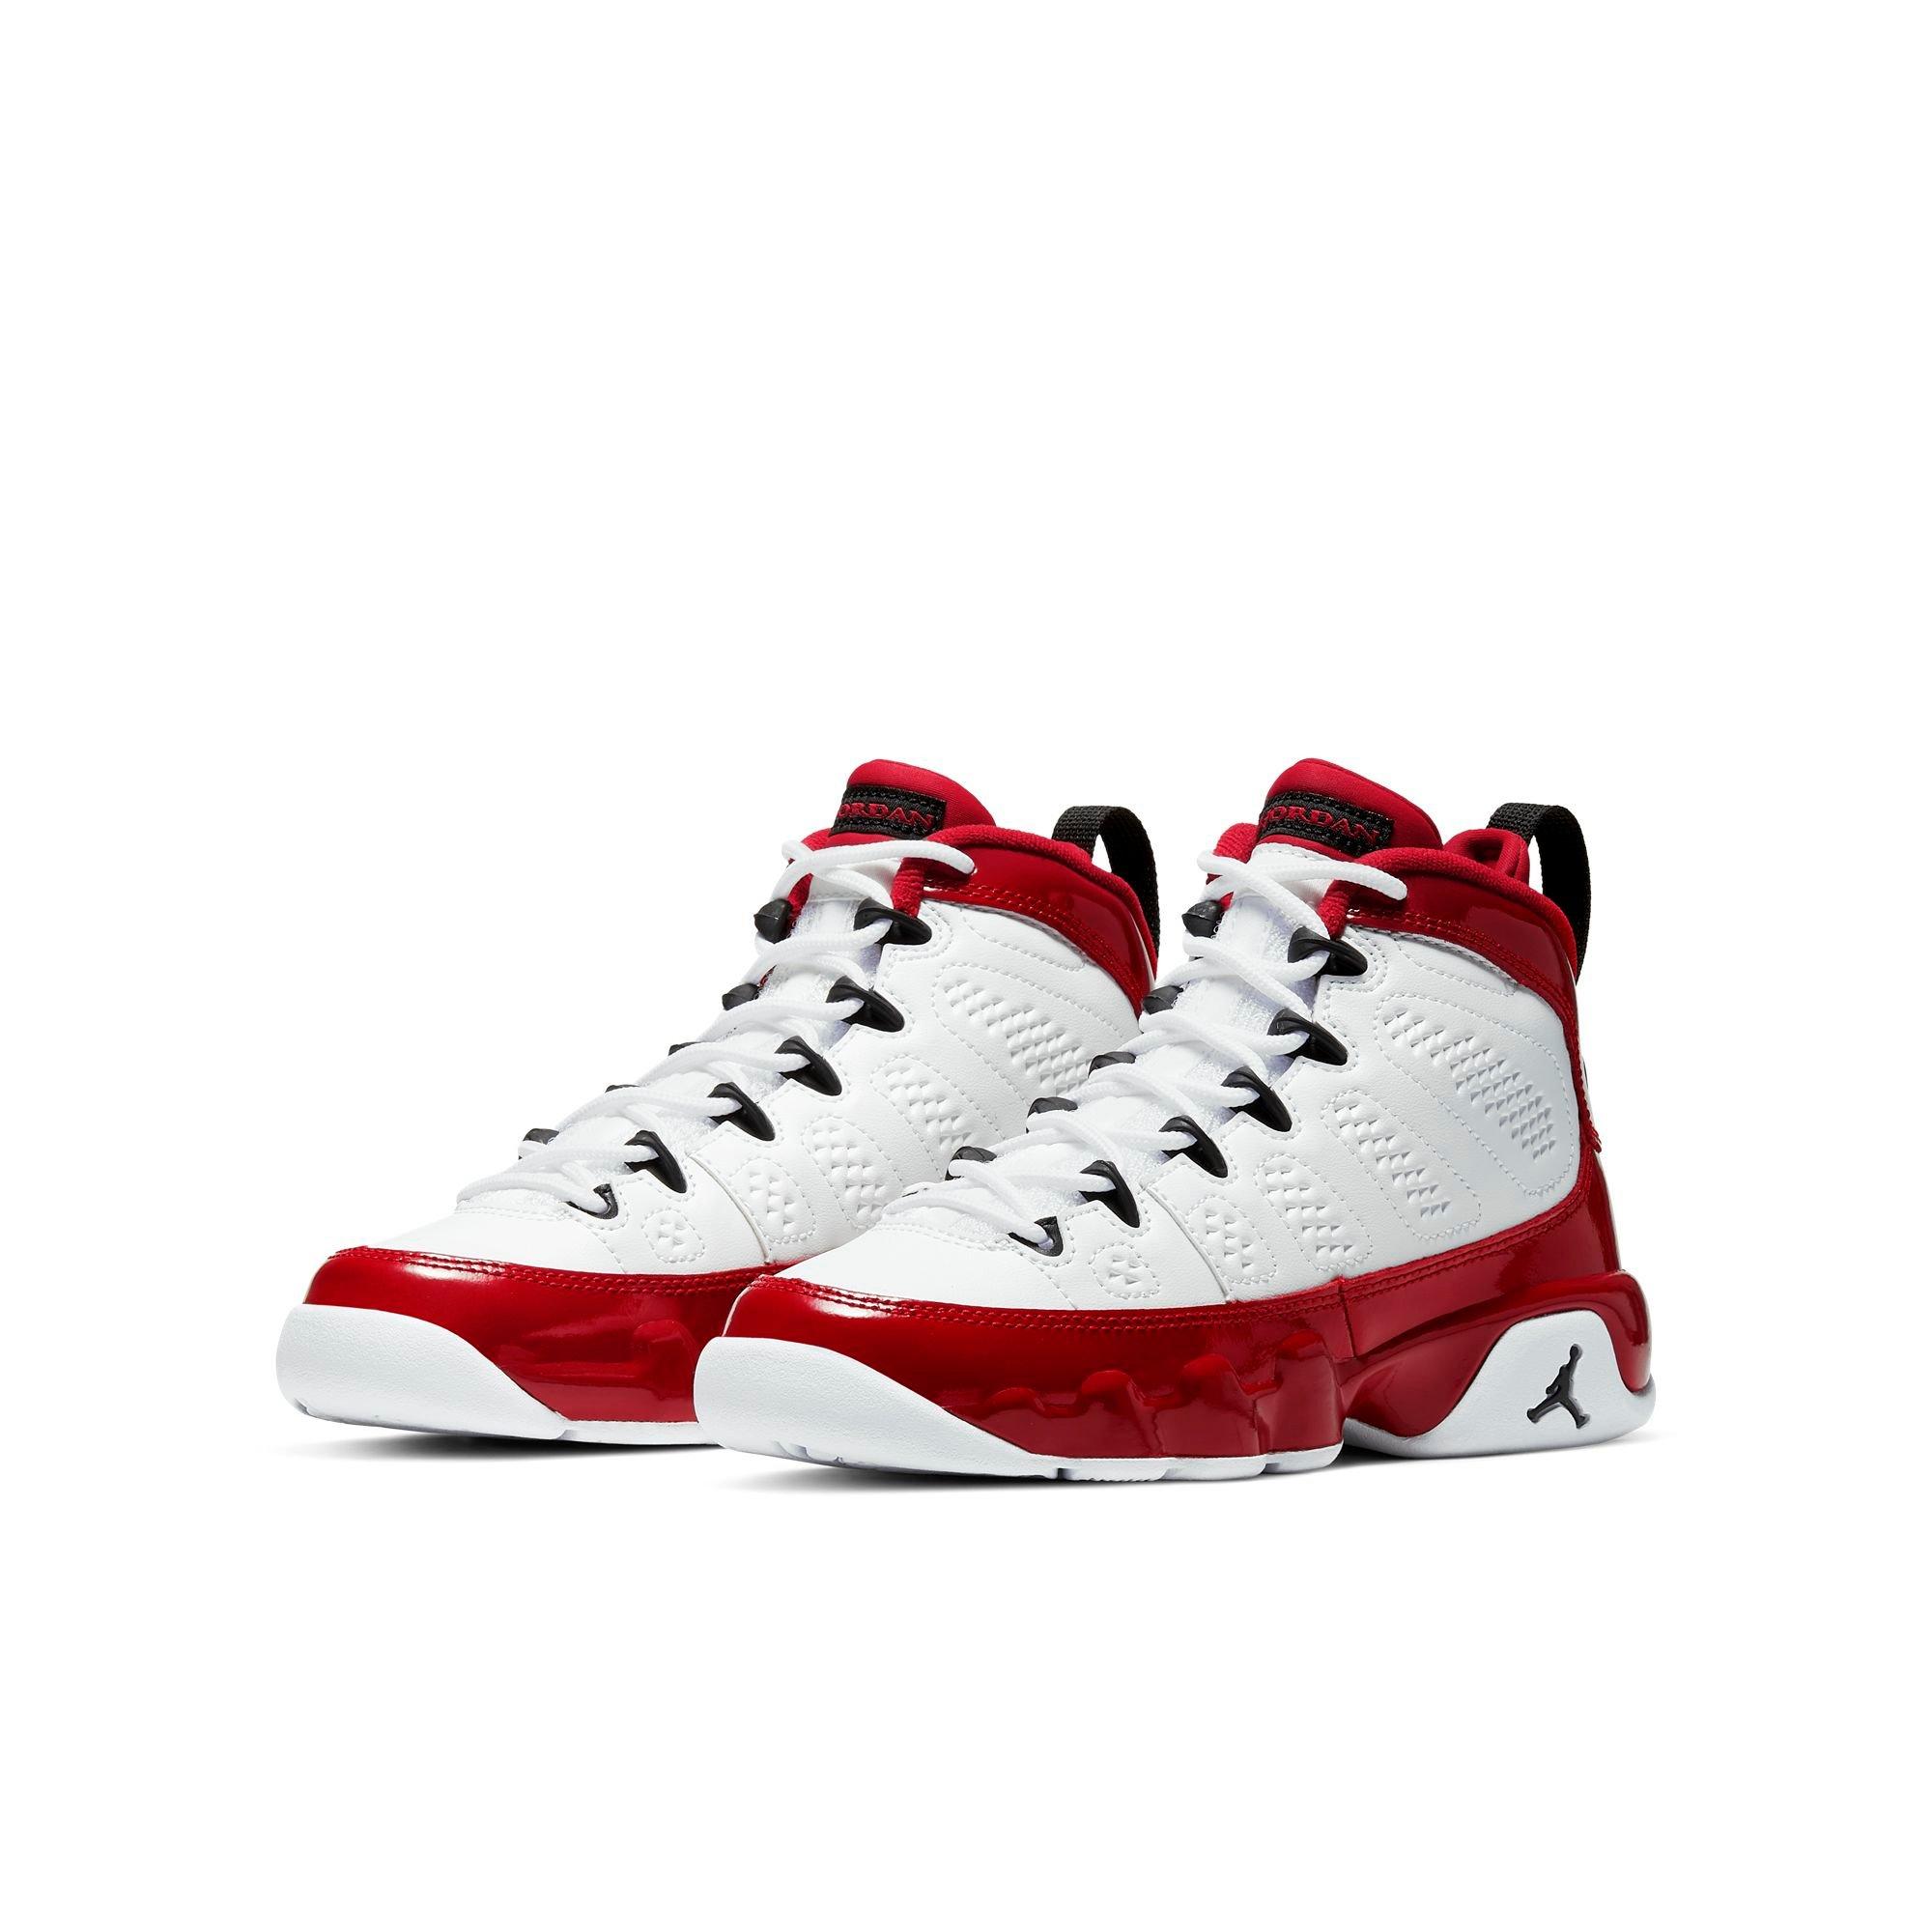 red and white 9s grade school